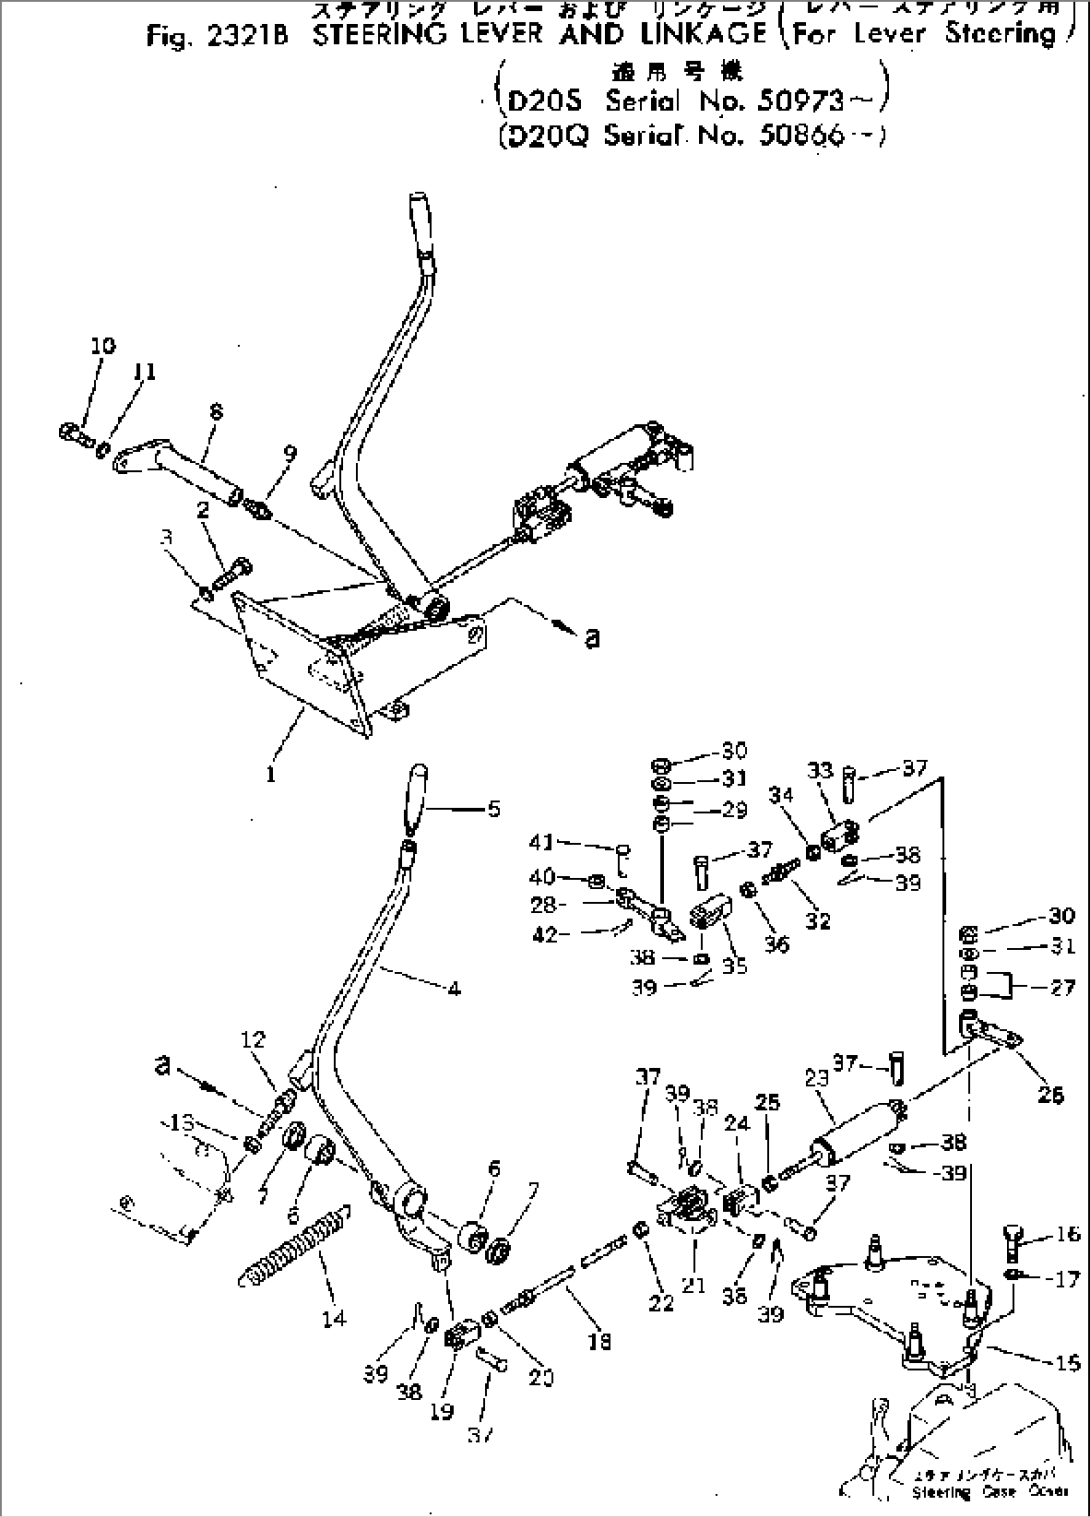 STEERING LEVER AND LINKAGE (FOR LEVER STEERING)(#50973-)